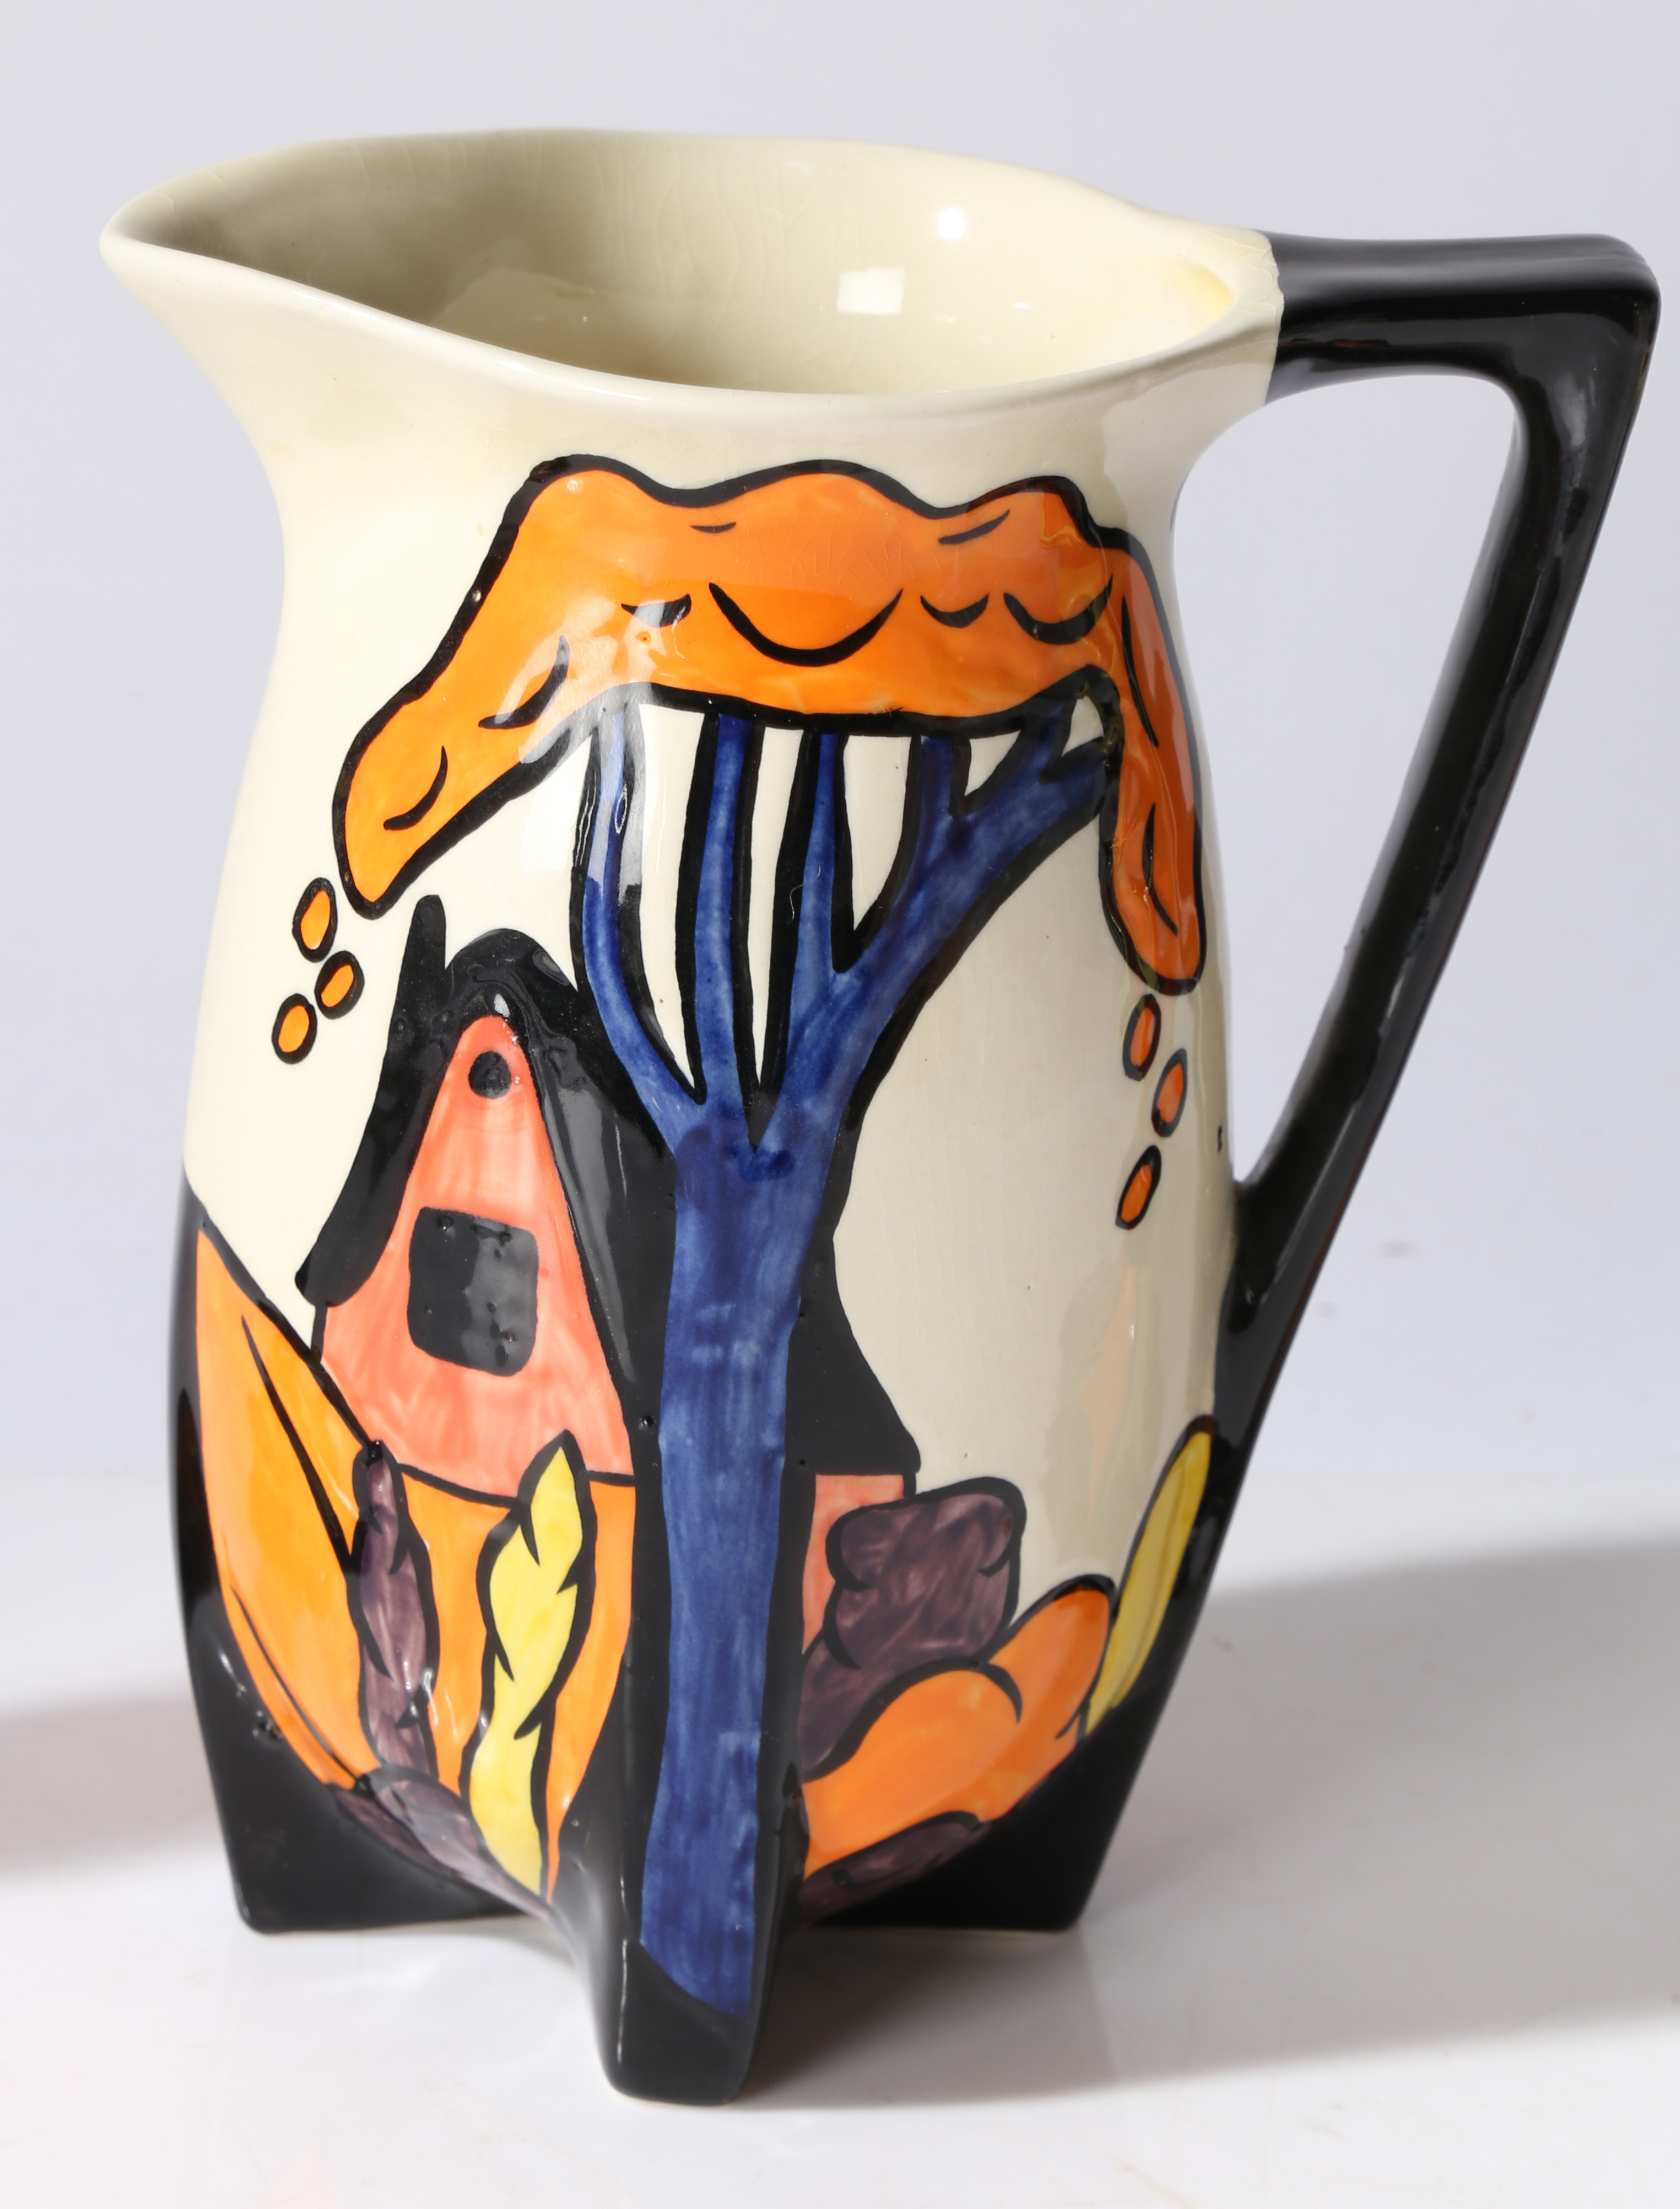 Lorna Bailey Ceramics. "Chetwynd" pattern jug and candlesticks. (3) - Image 3 of 8